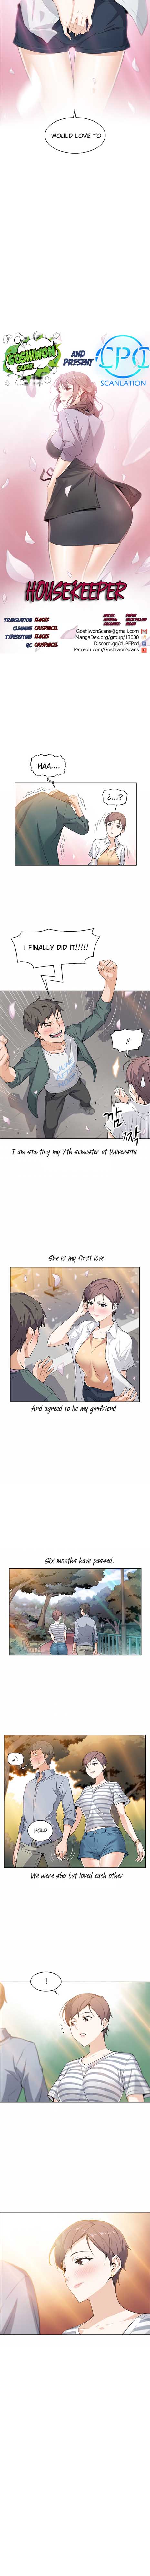 Housekeeper [Neck Pillow, Paper] Ch.49/49 [English] [Manhwa PDF] Completed